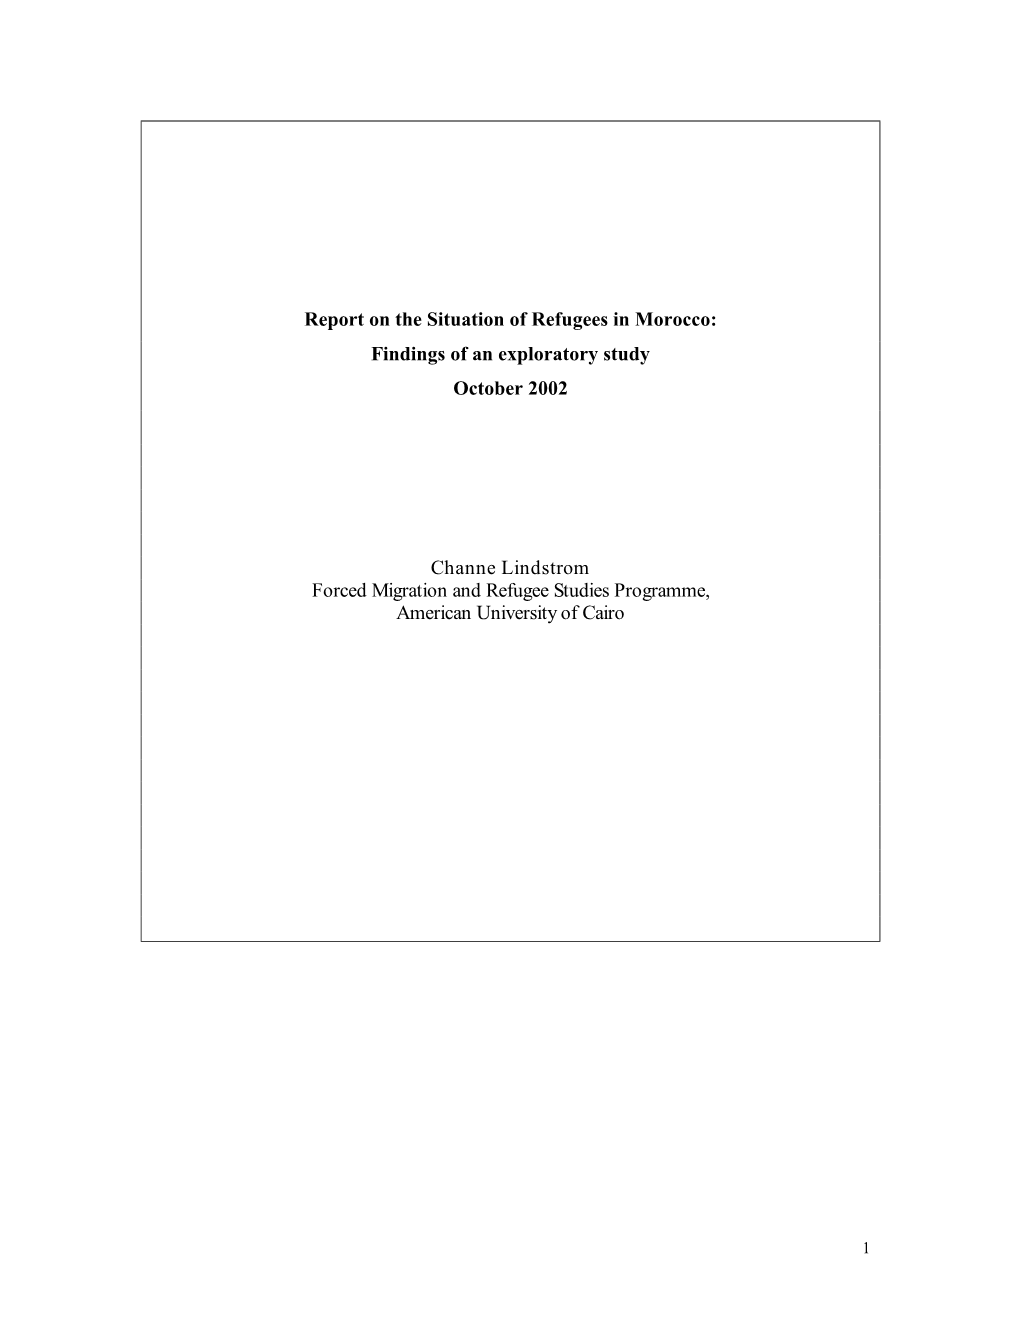 The Situation of Refugees in Morocco: Findings of an Exploratory Study October 2002